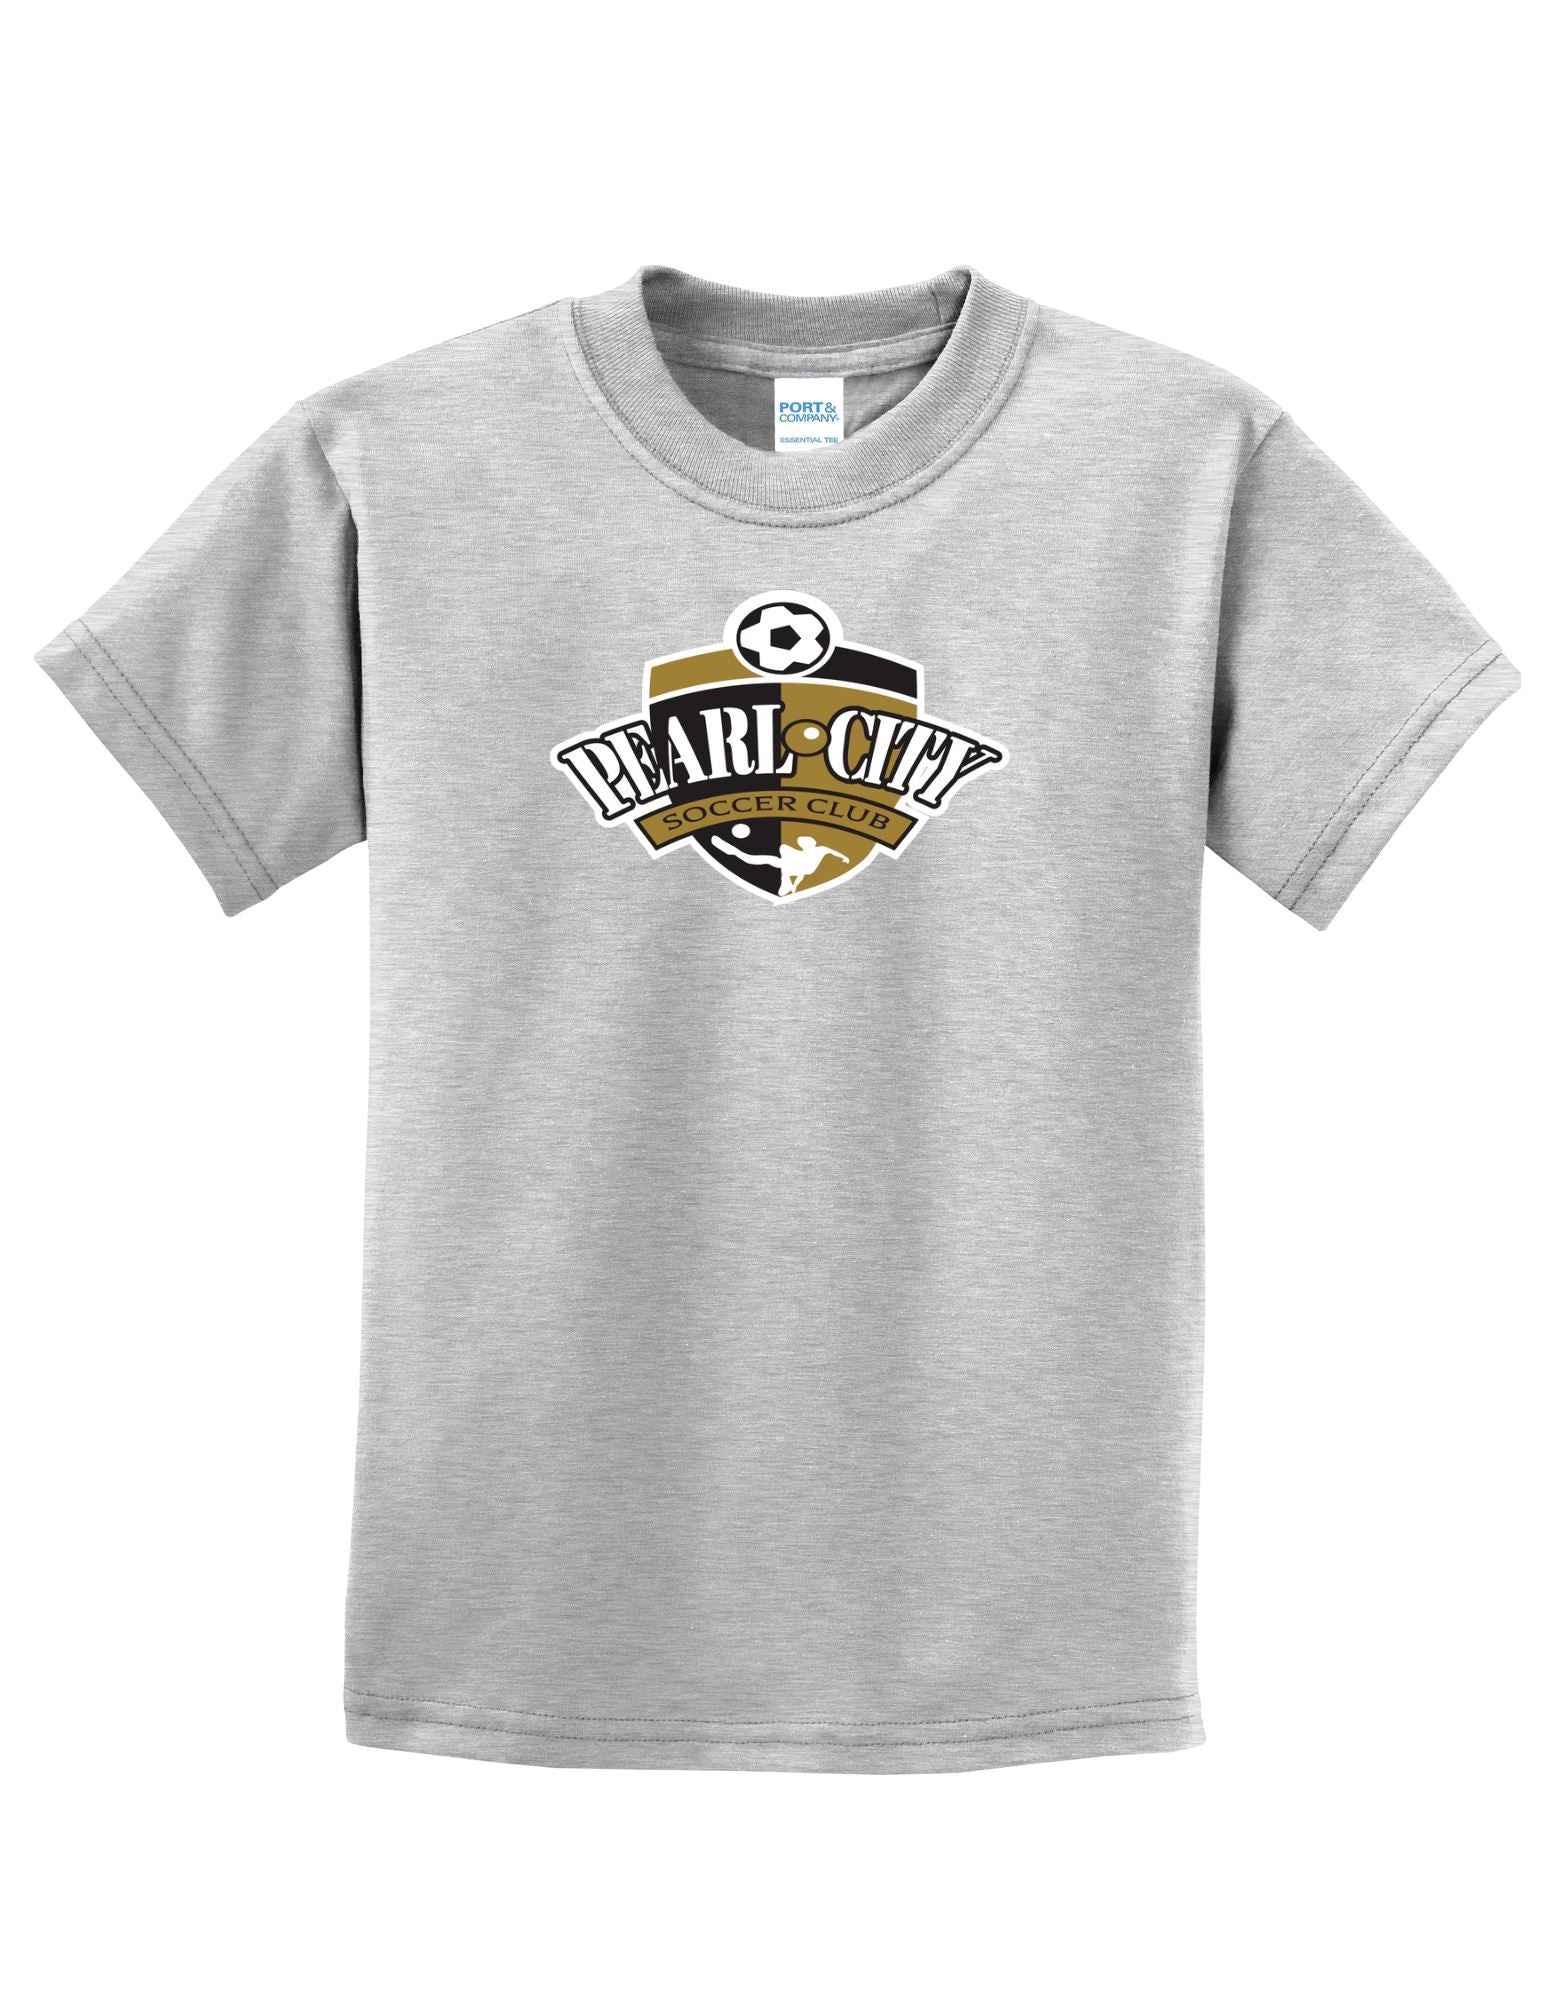 Pearl City Soccer Club Youth Tee Essential Tee Goal Kick Soccer Youth X-Small Athletic Heather 